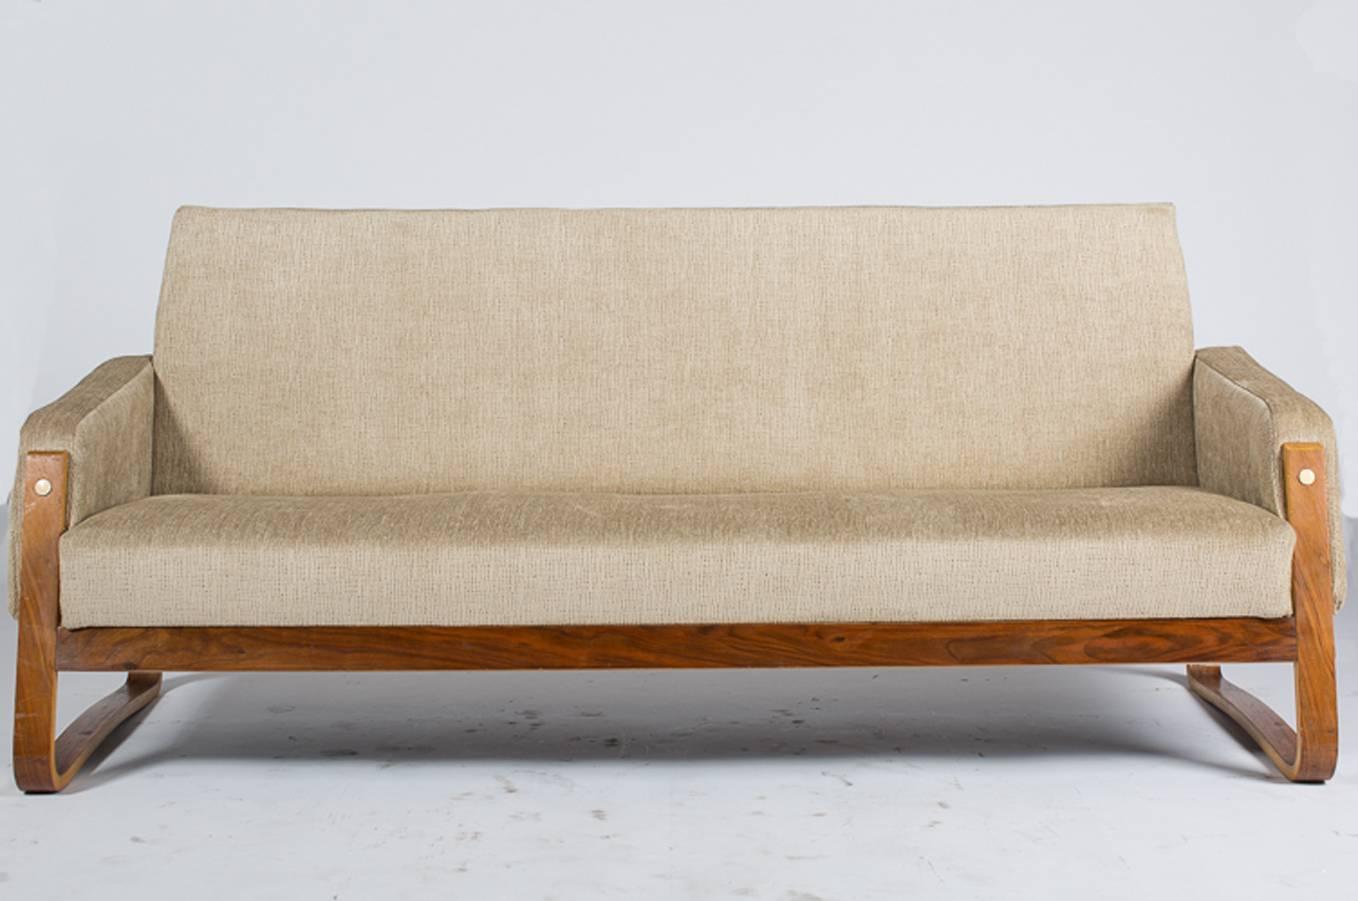 Art Deco settee. Great lines, bentwood with burled walnut veneer. Finish in French polish. Newly upholstered in beige chenille, very comfortable.